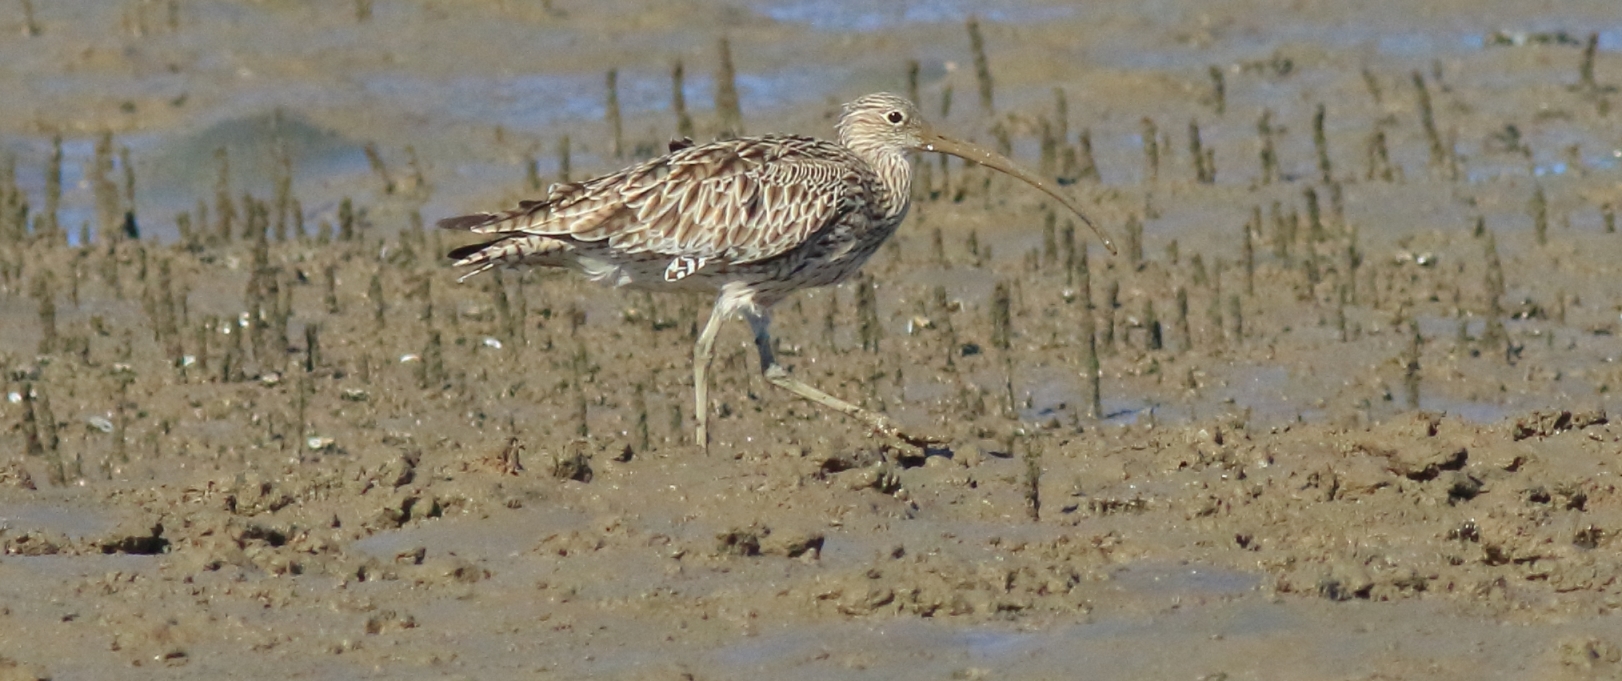 Shorebirds like the Eastern Curlew are at risk if the Toondah Project proceeds